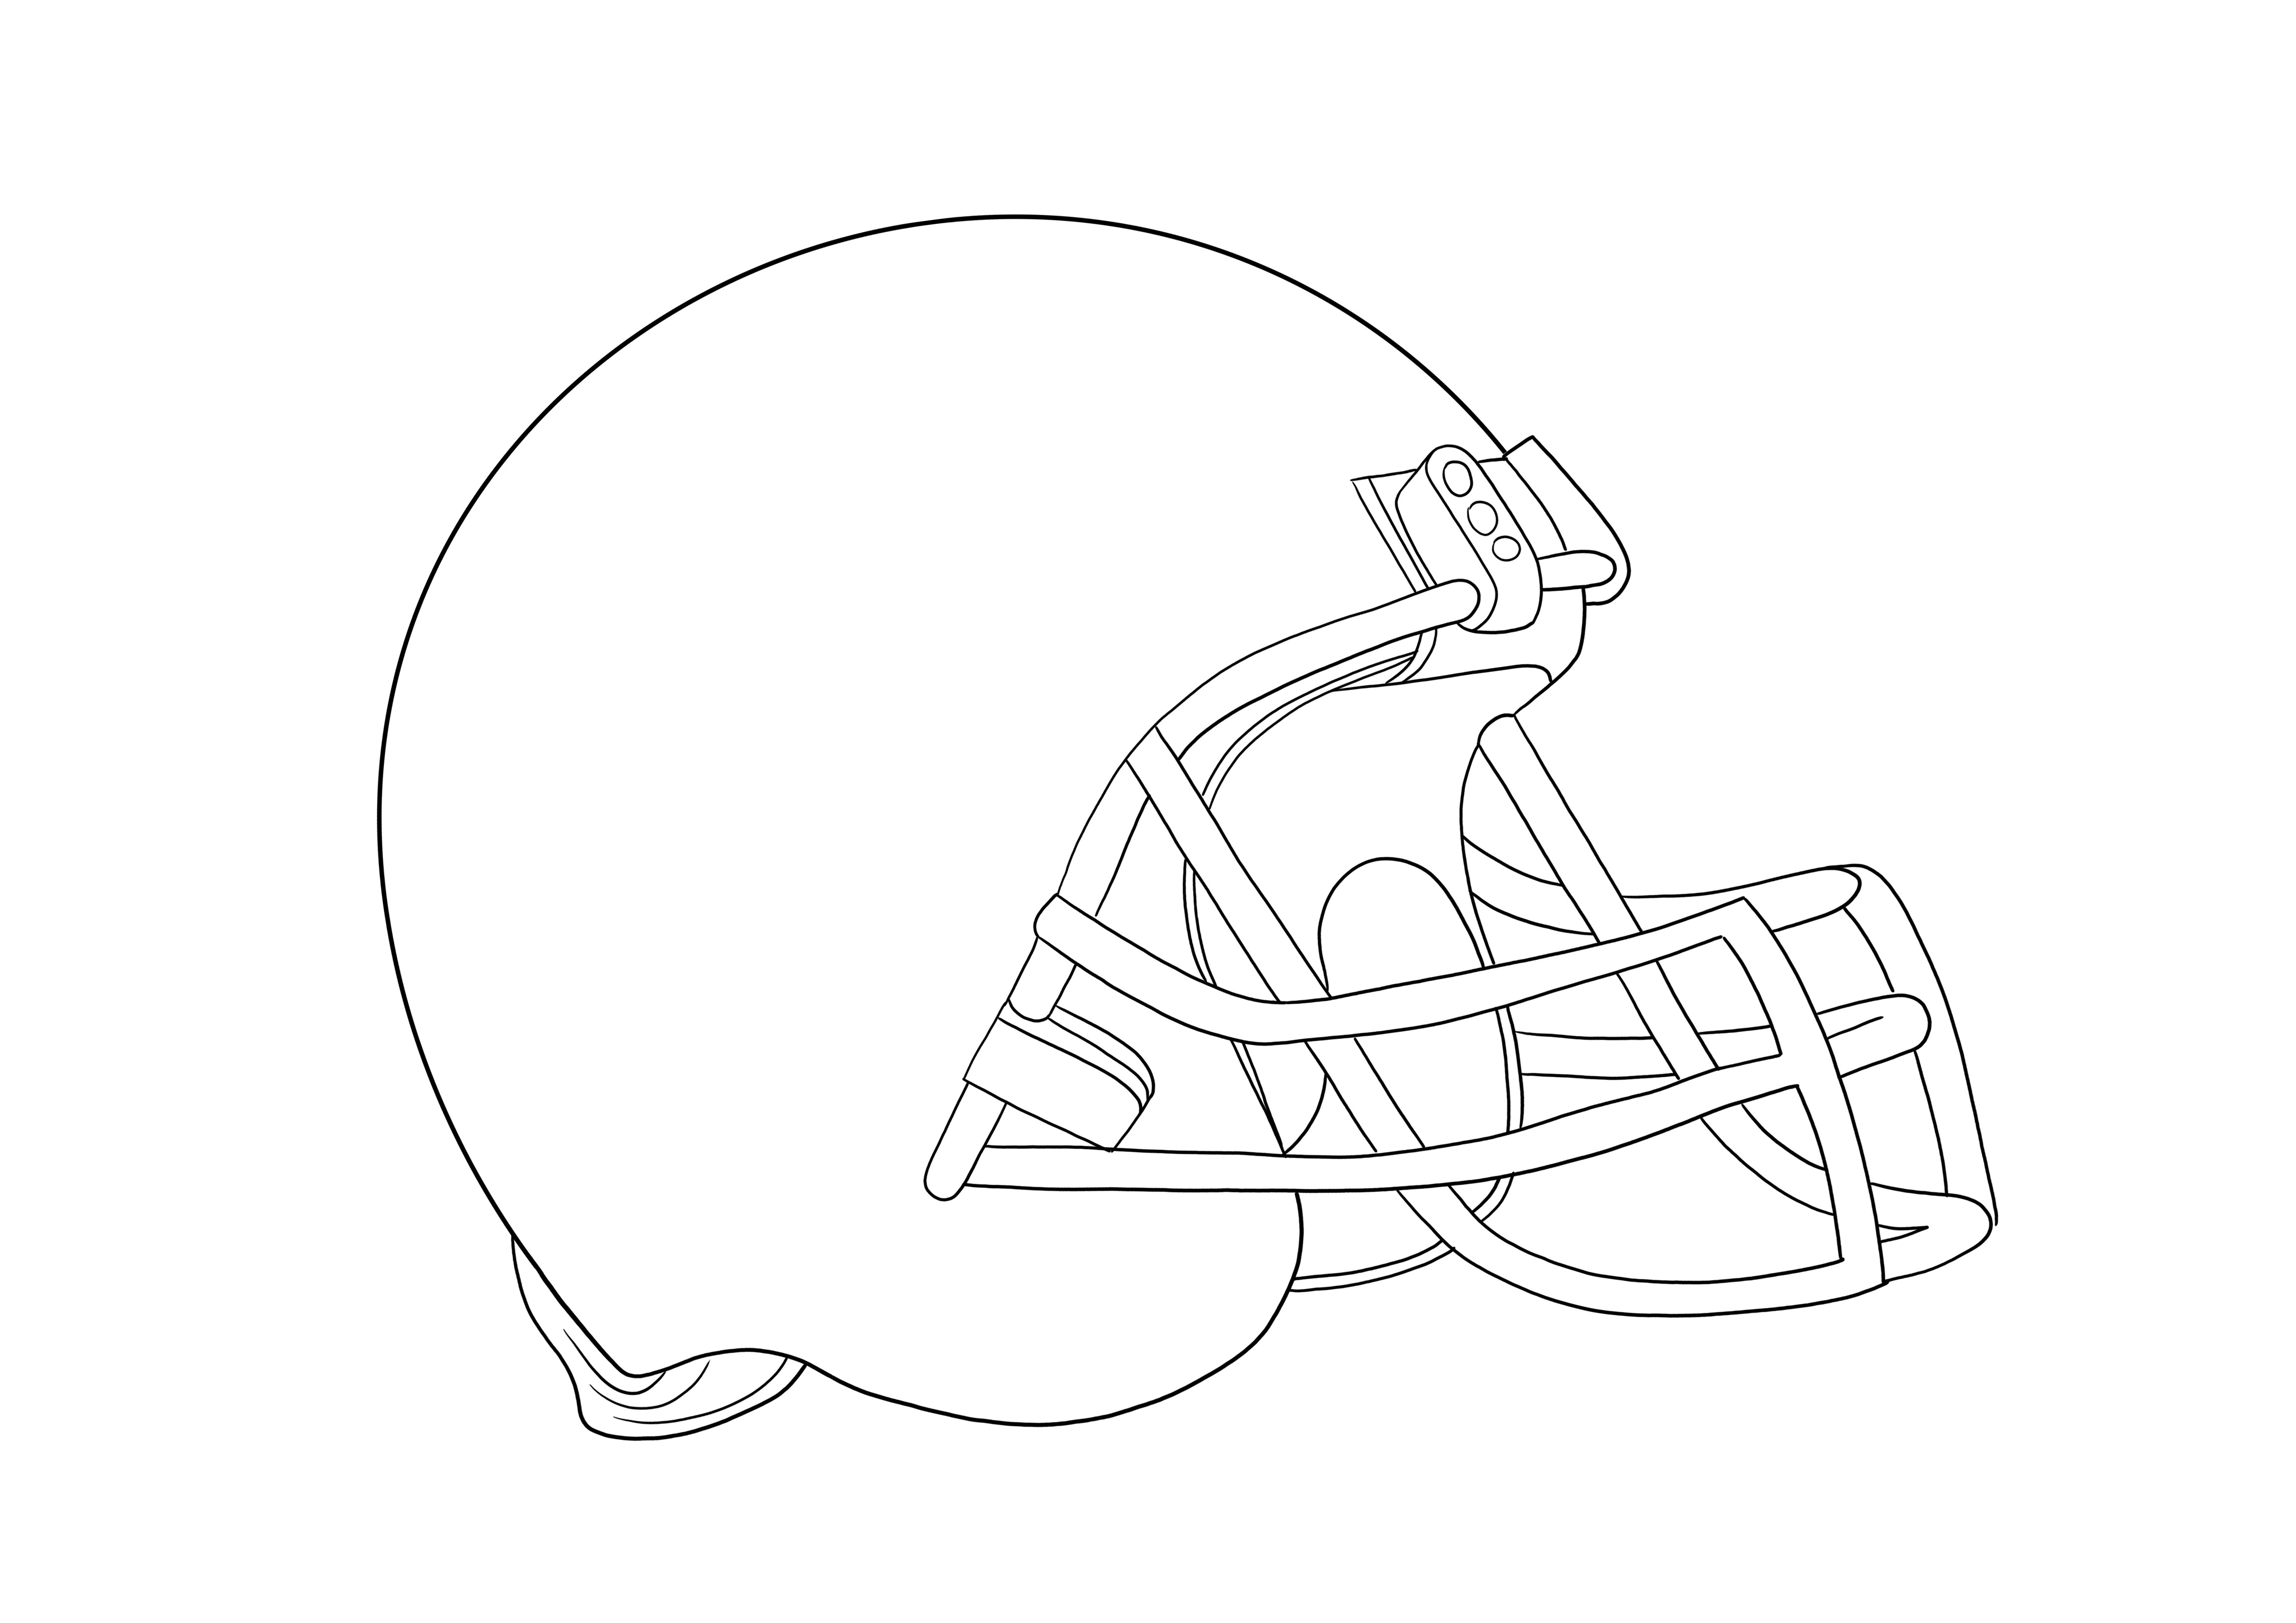 American Football Helmet printable for free to color for sports lovers